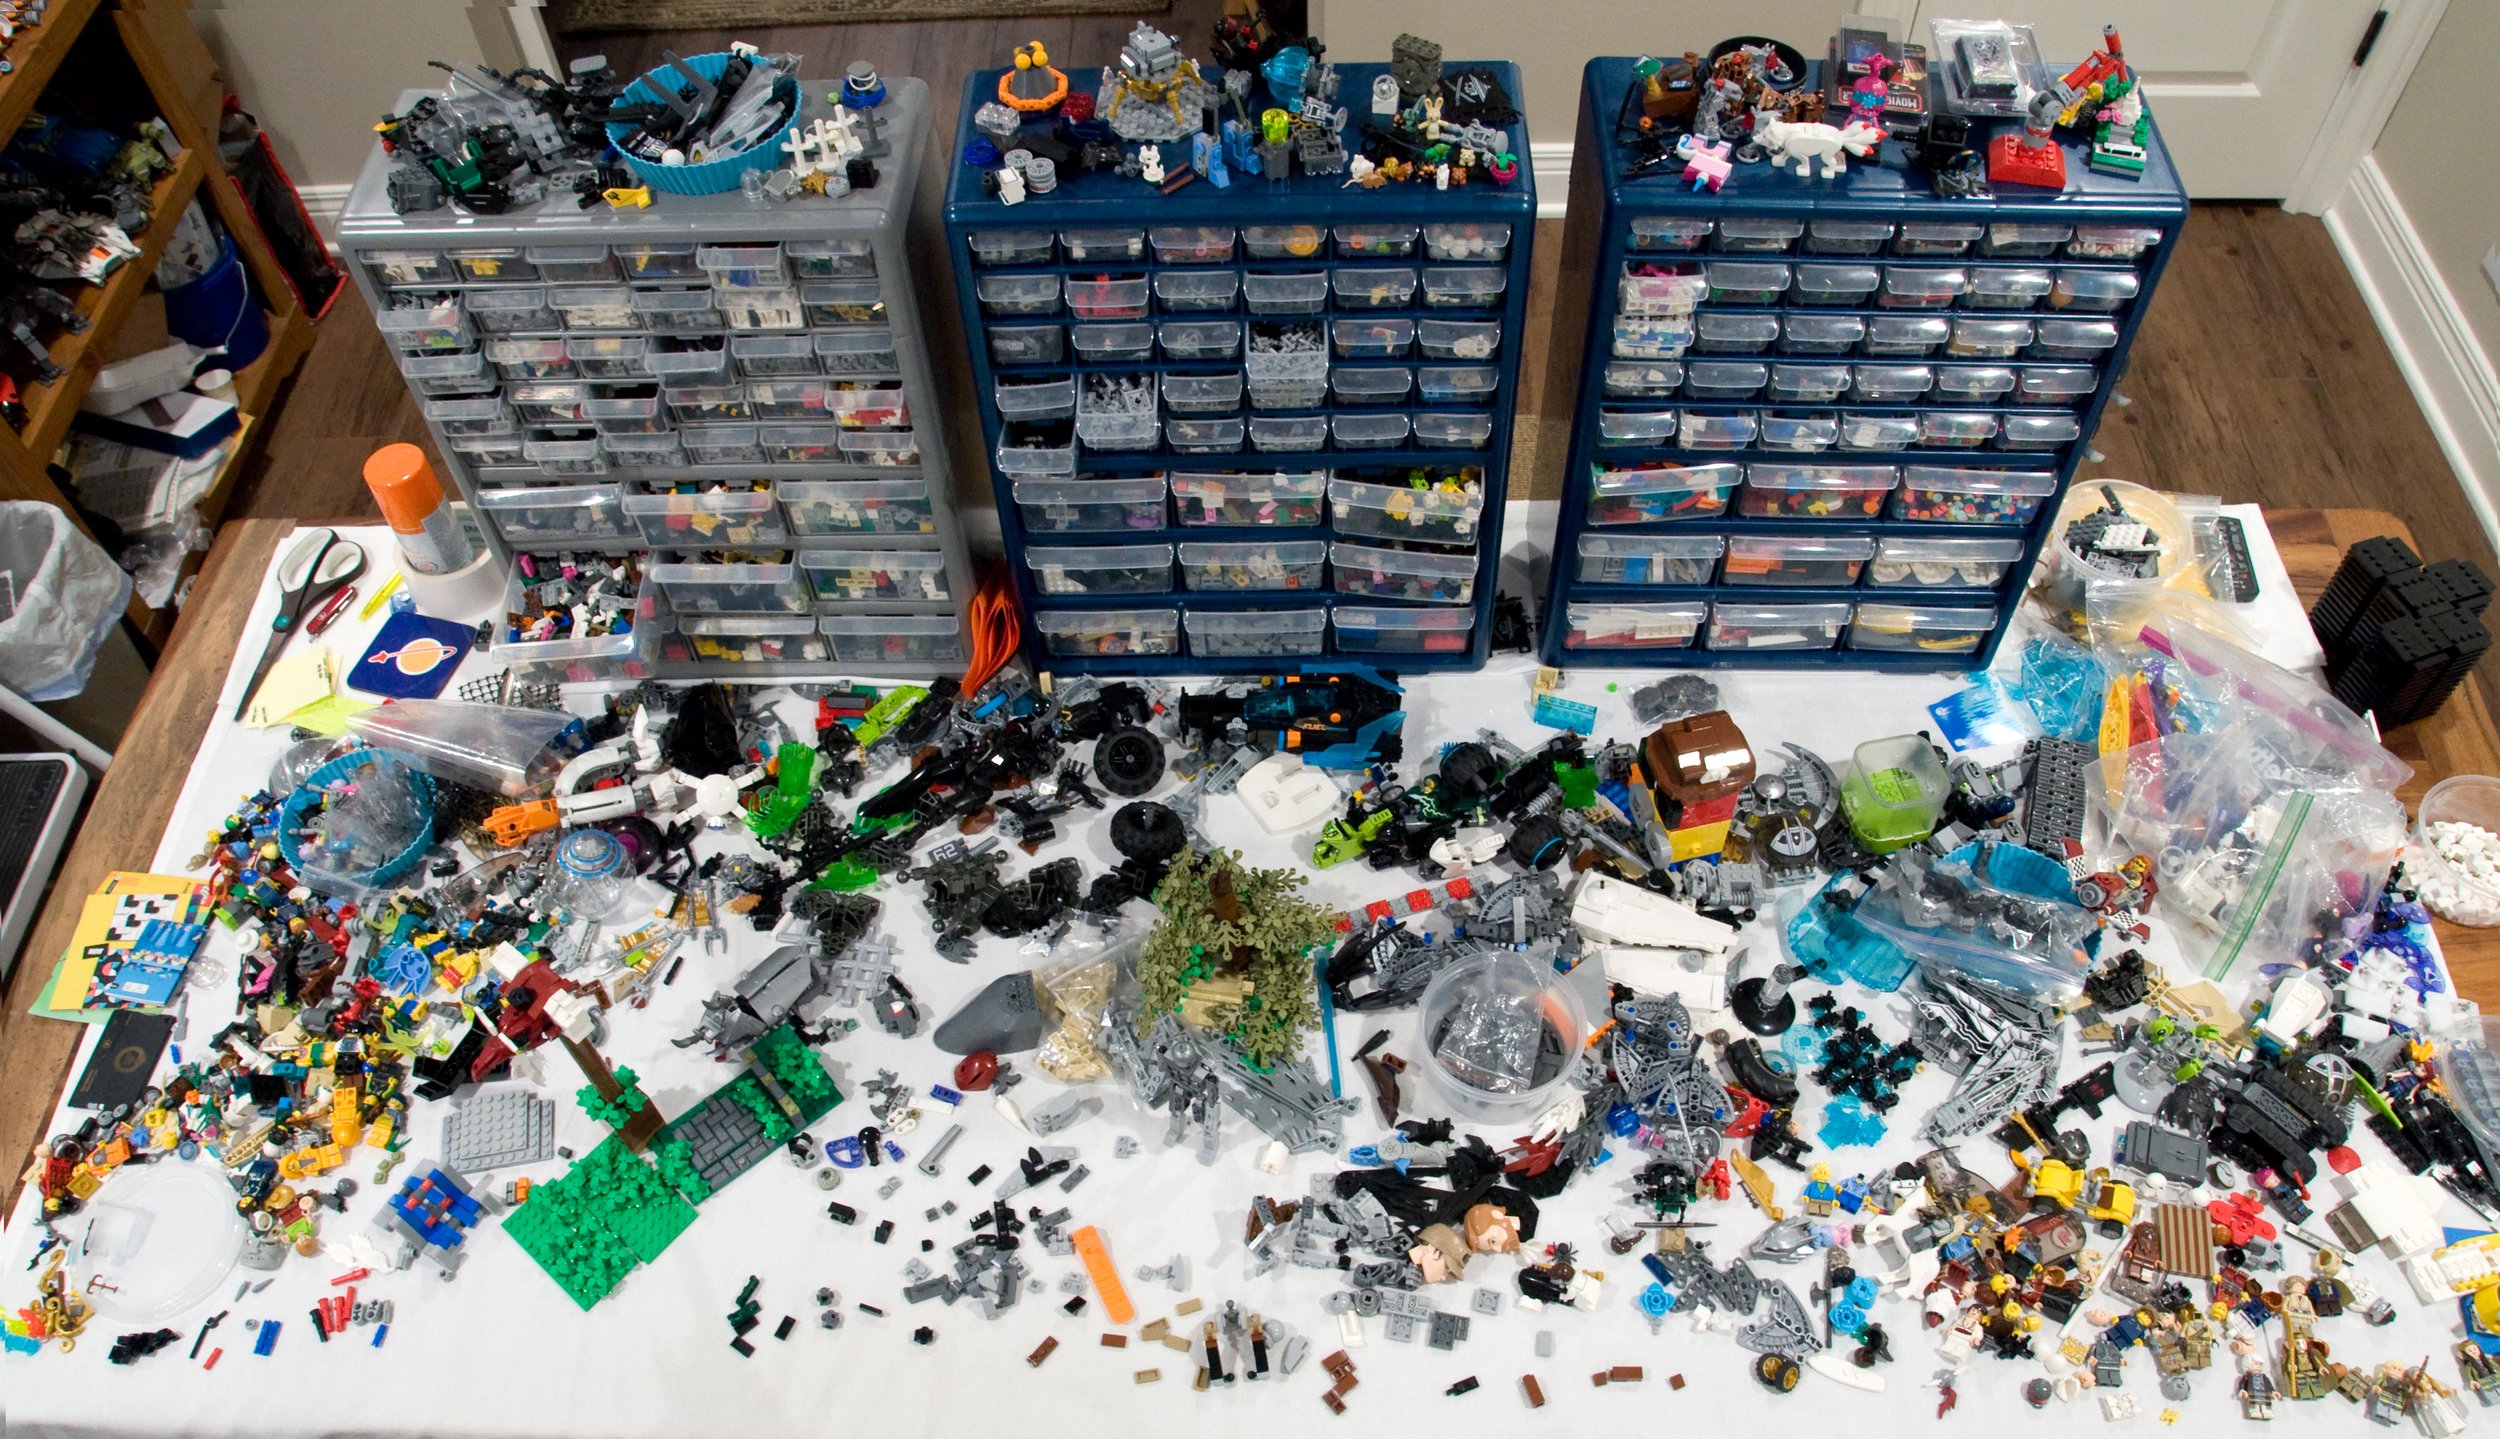 How To Move Your LEGO Collection - BrickNerd - All things LEGO and